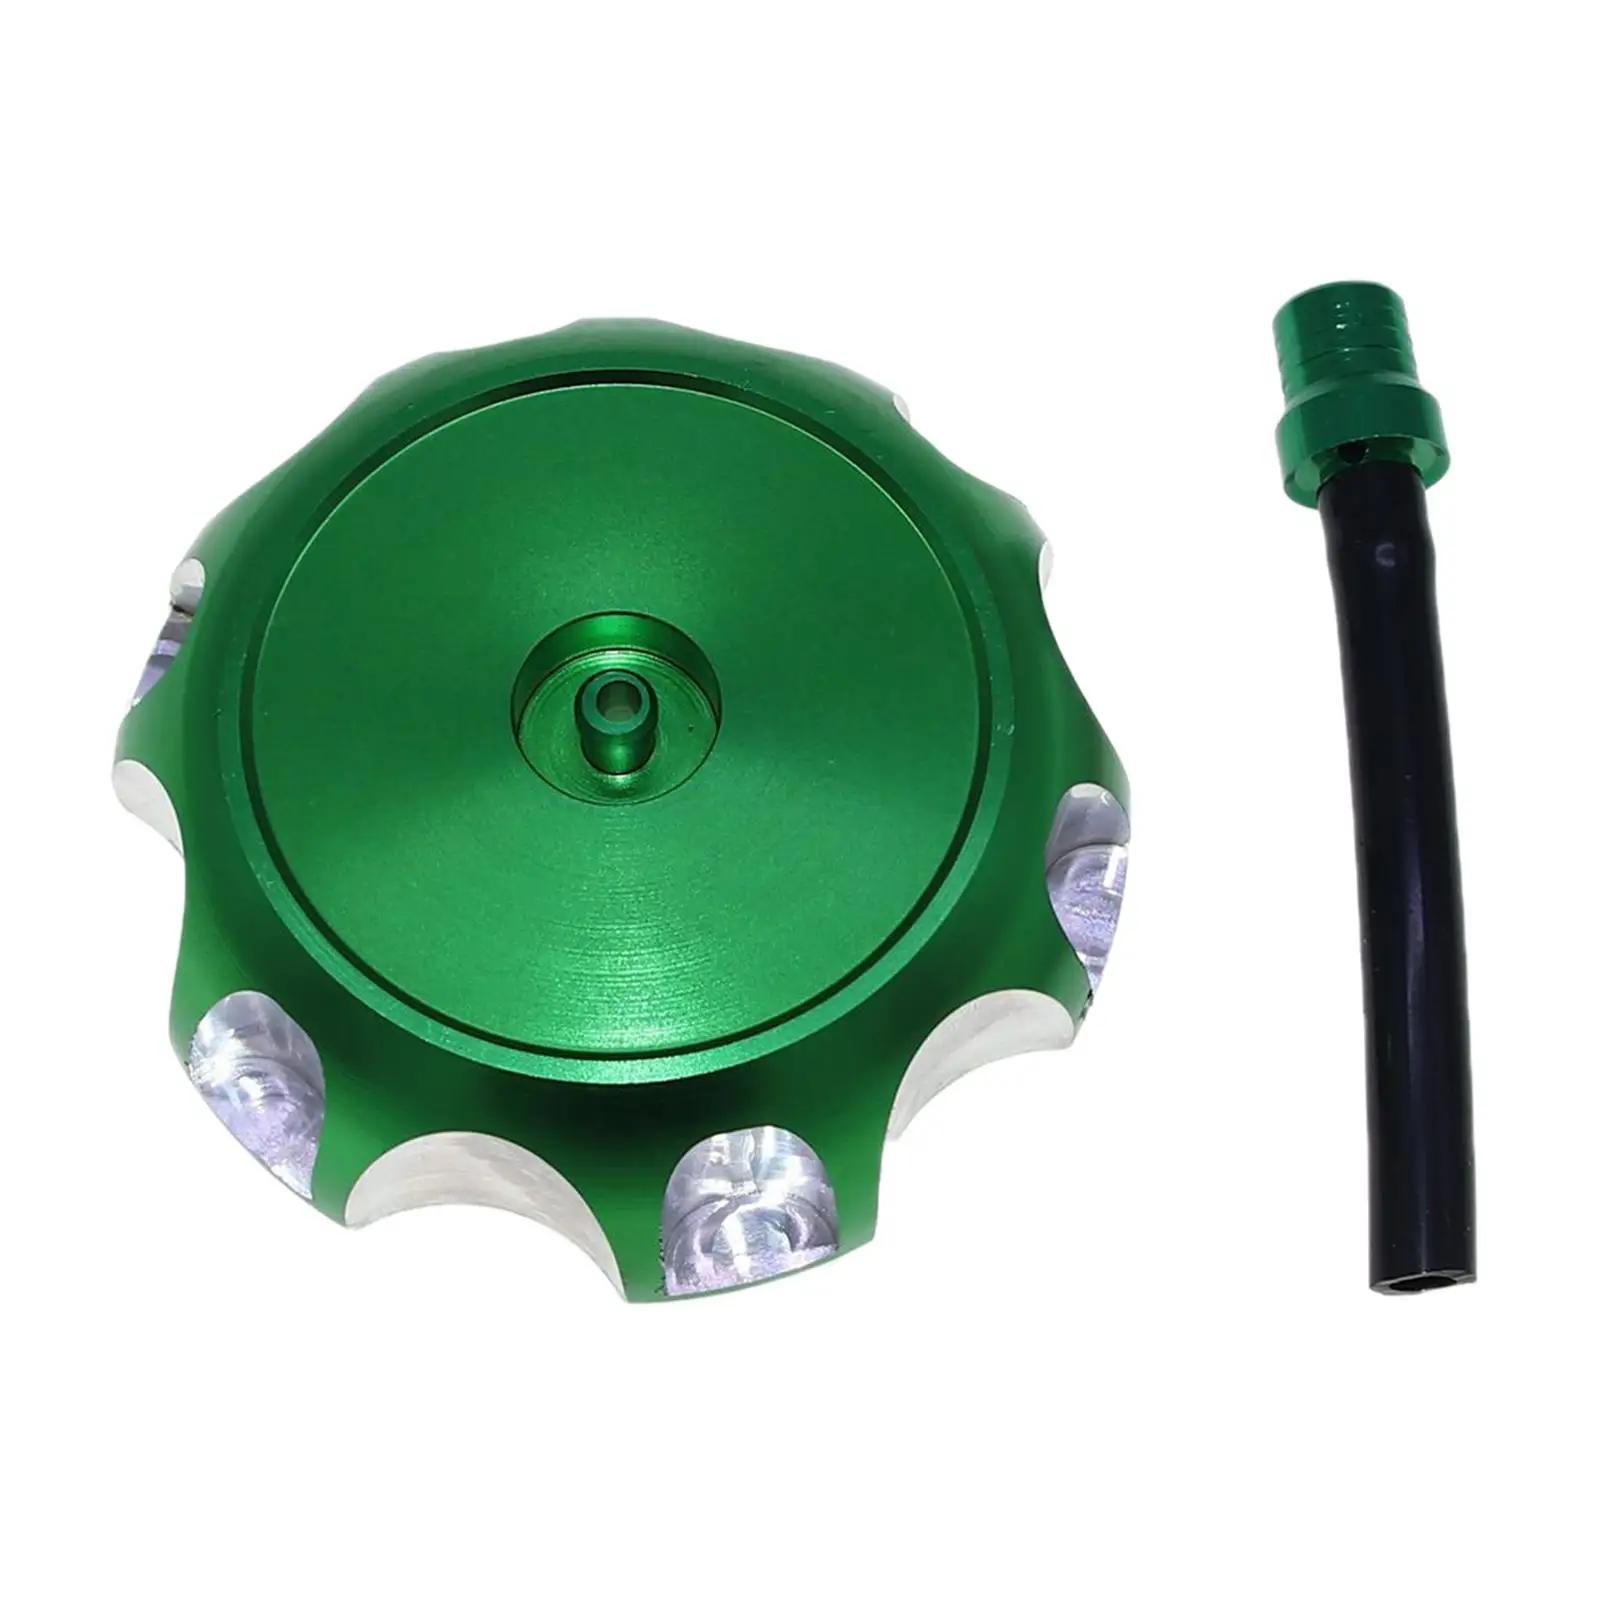 Fuel Tank Cap with Finger Grooves motorcycle Gas Cap for Honda Durable